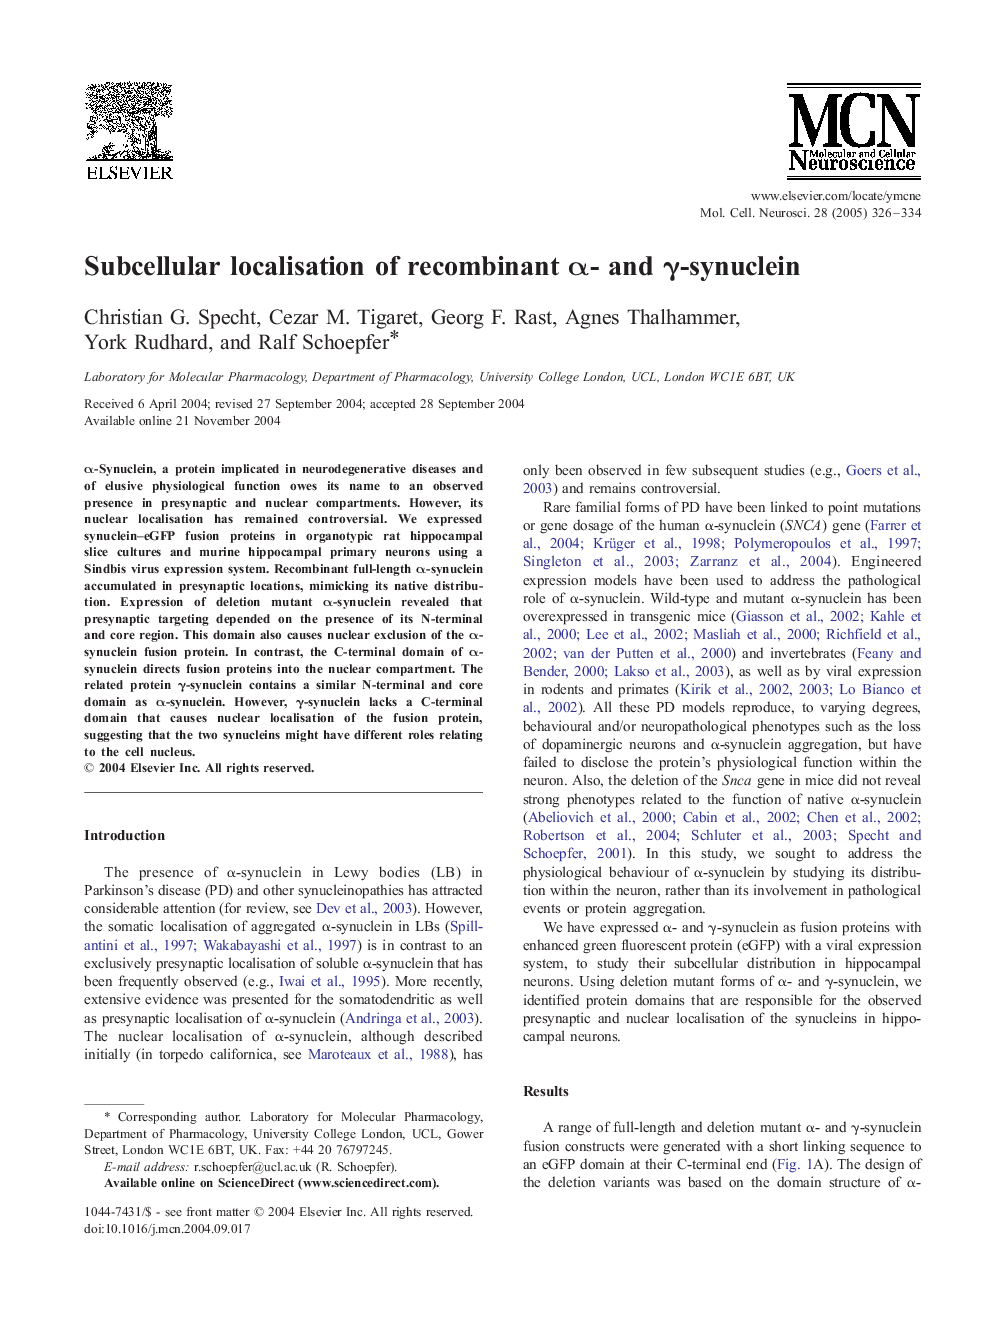 Subcellular localisation of recombinant Î±- and Î³-synuclein